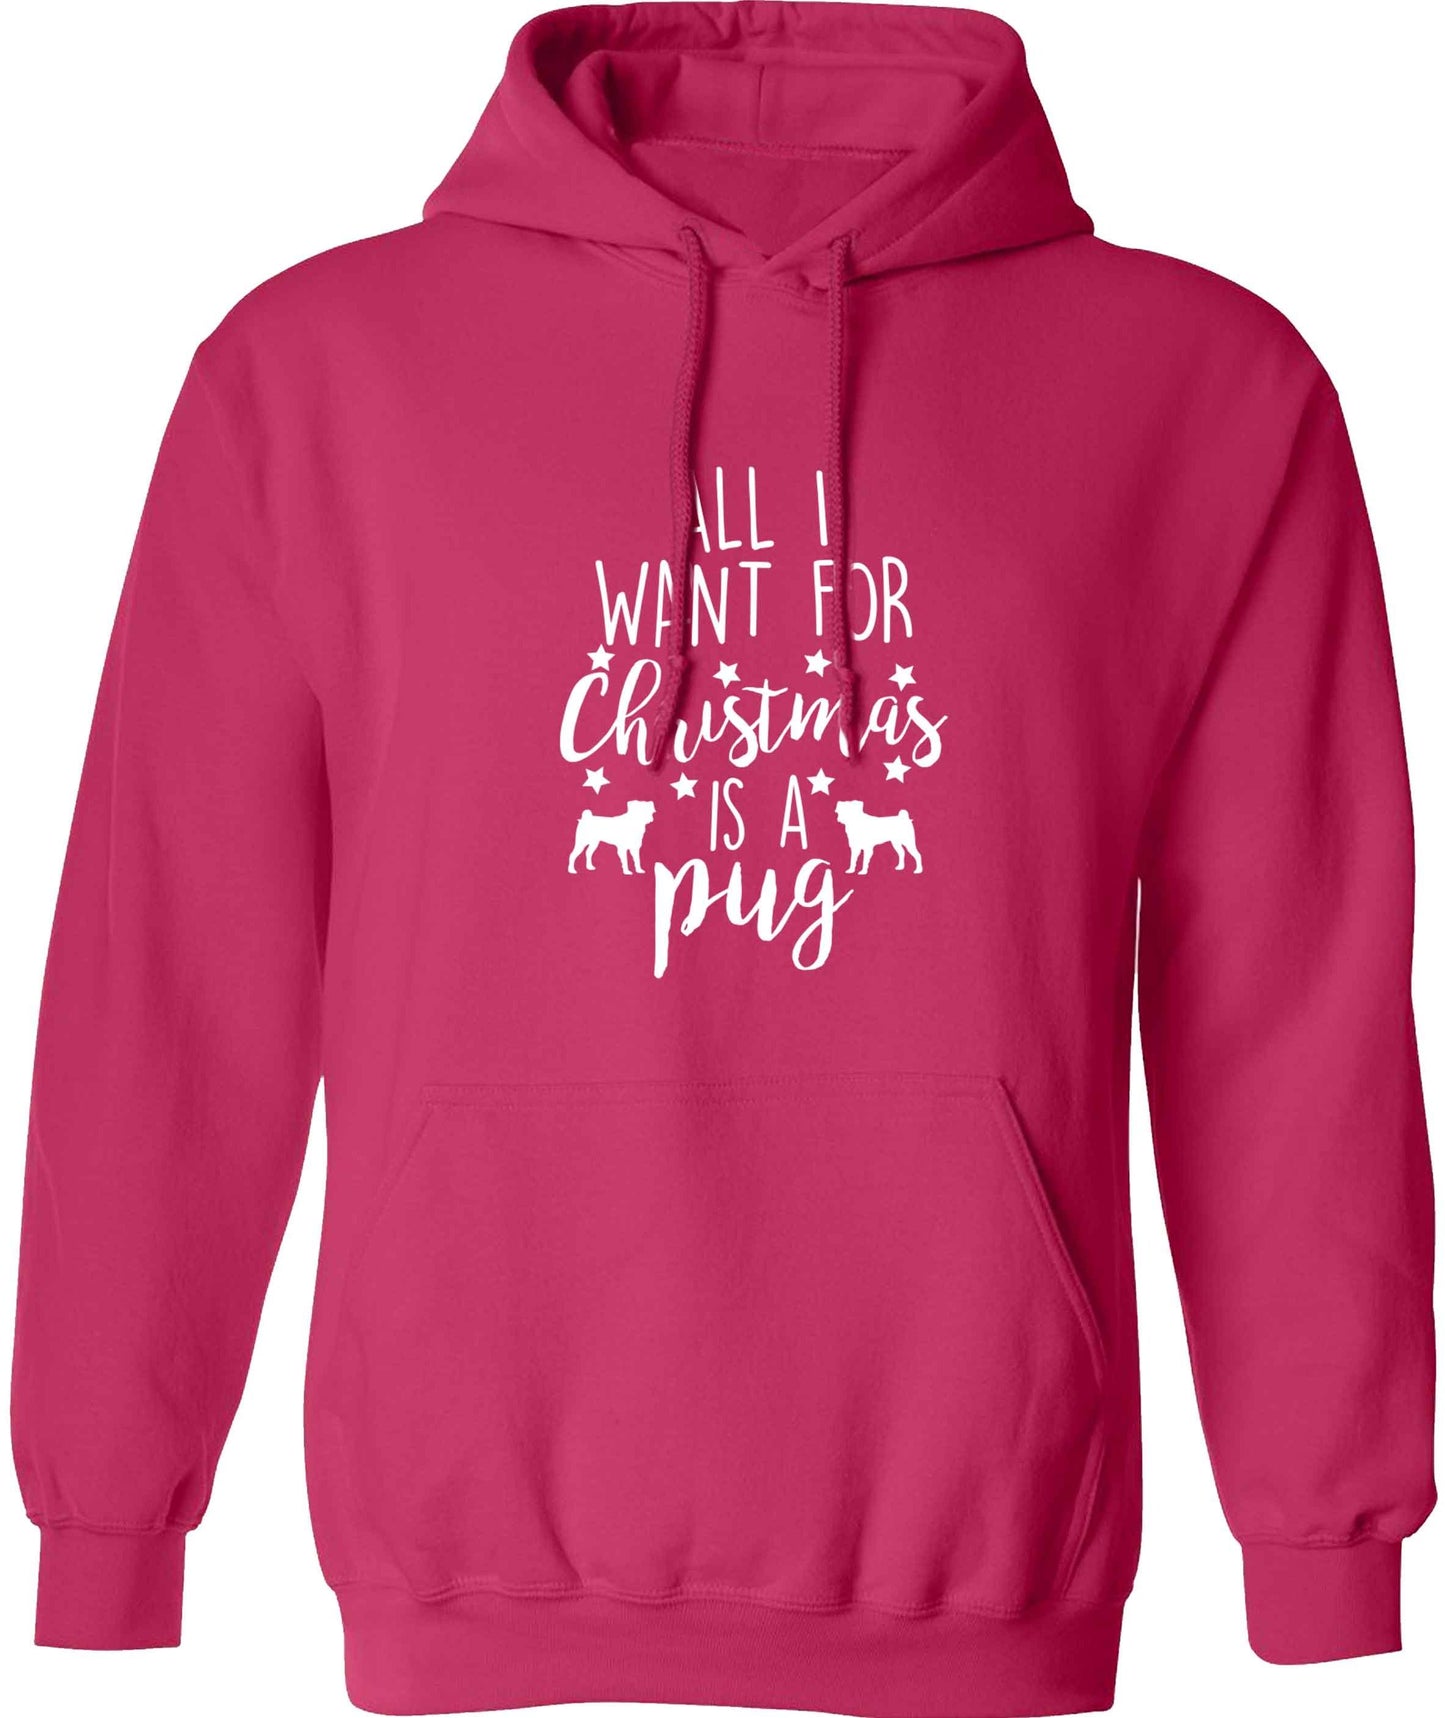 All I want for Christmas is a pug adults unisex pink hoodie 2XL